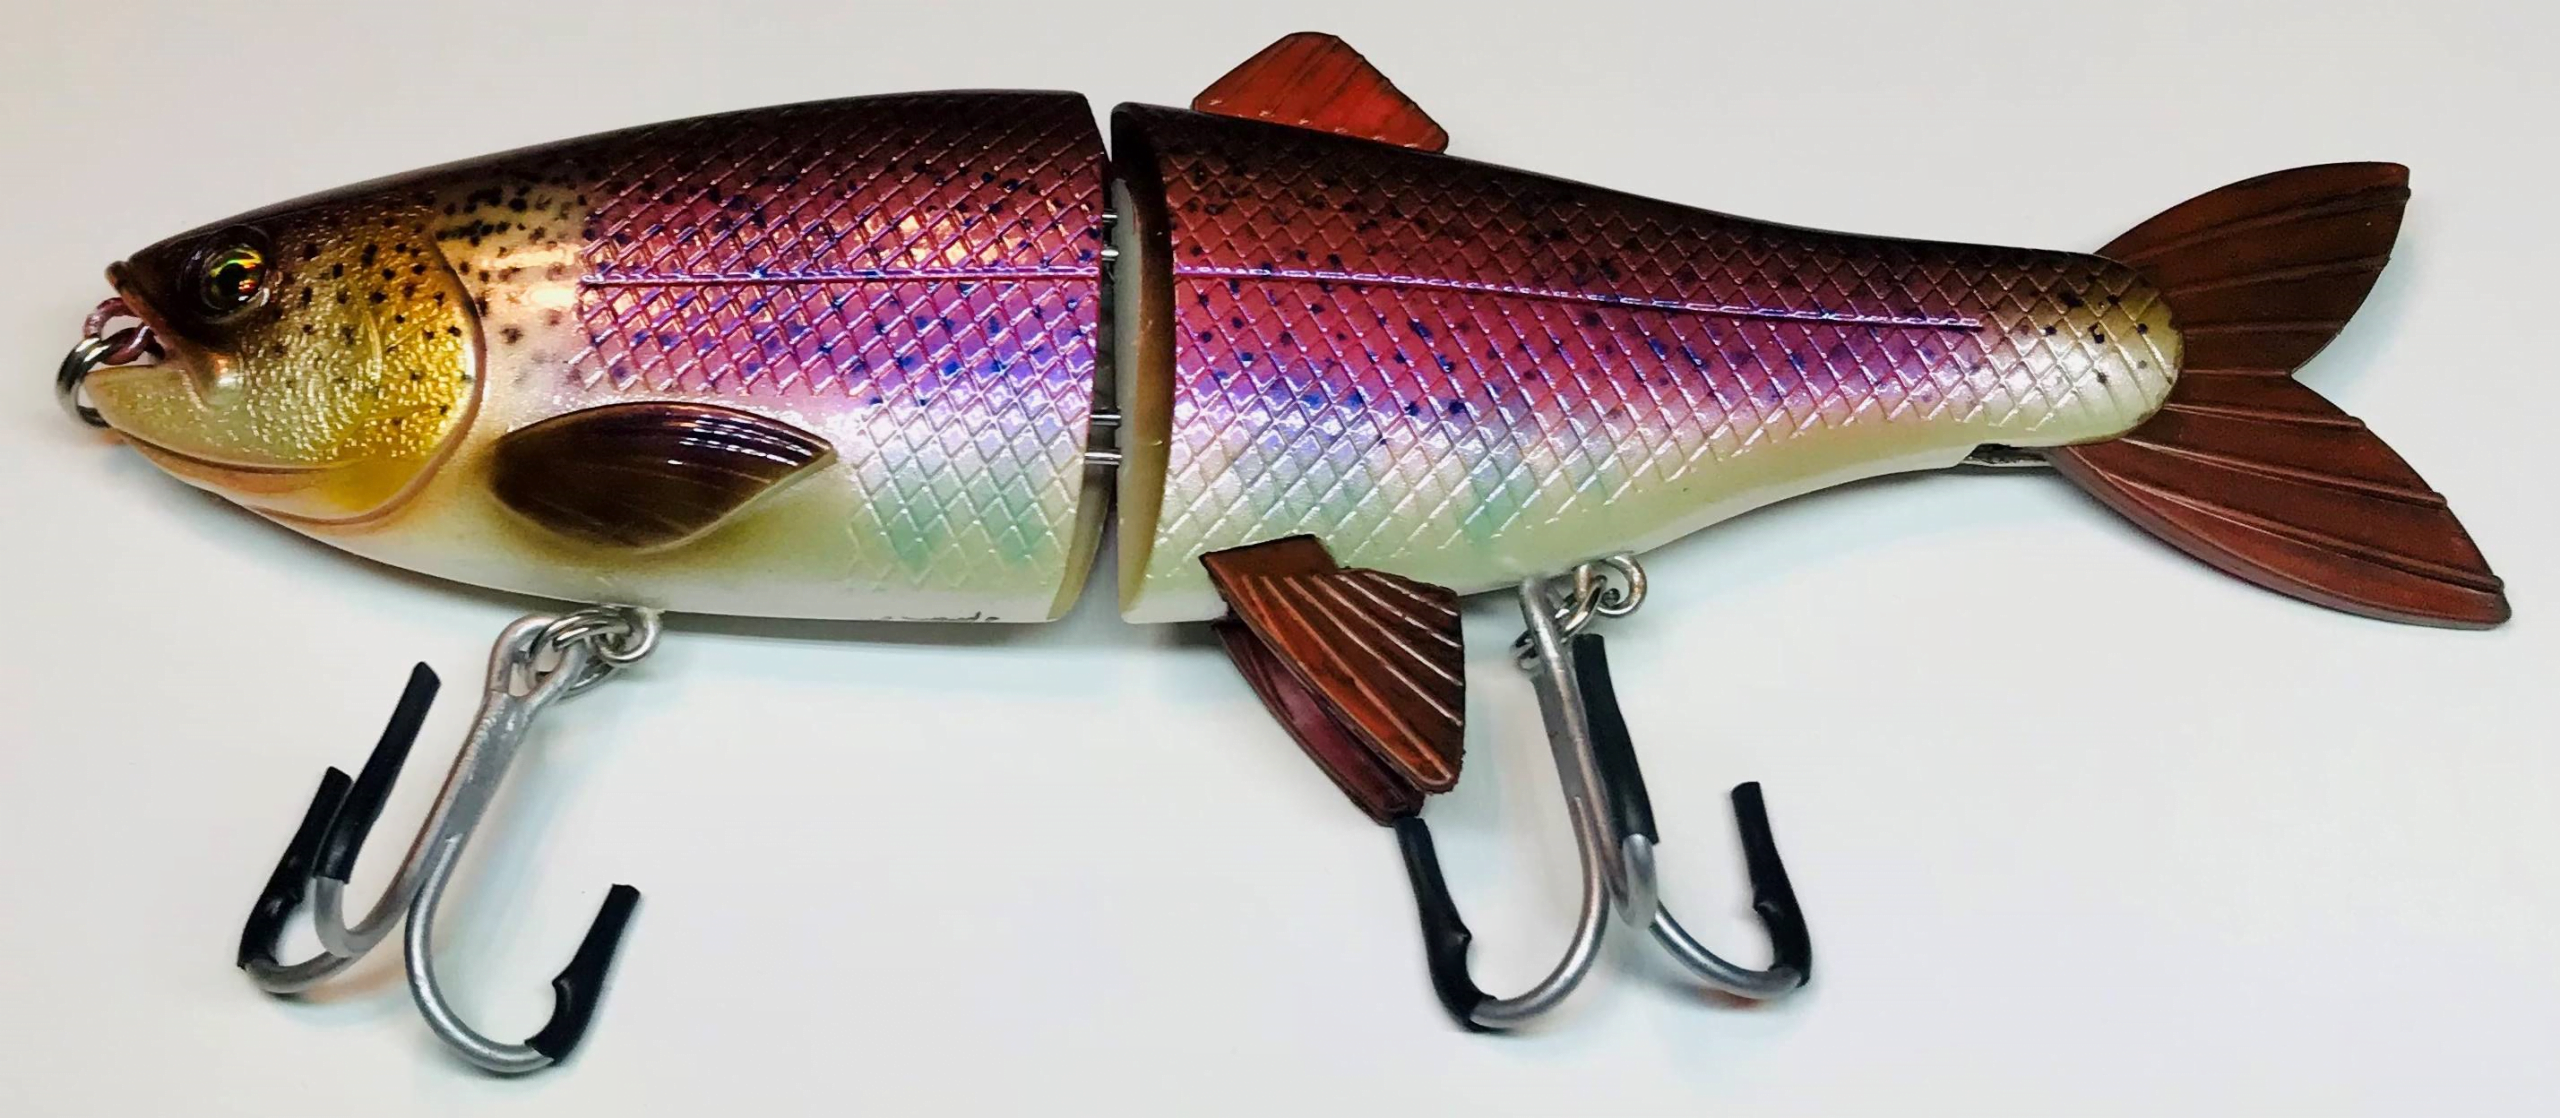 What are some lures that would work for rainbow trout as well as striped  bass? - Quora